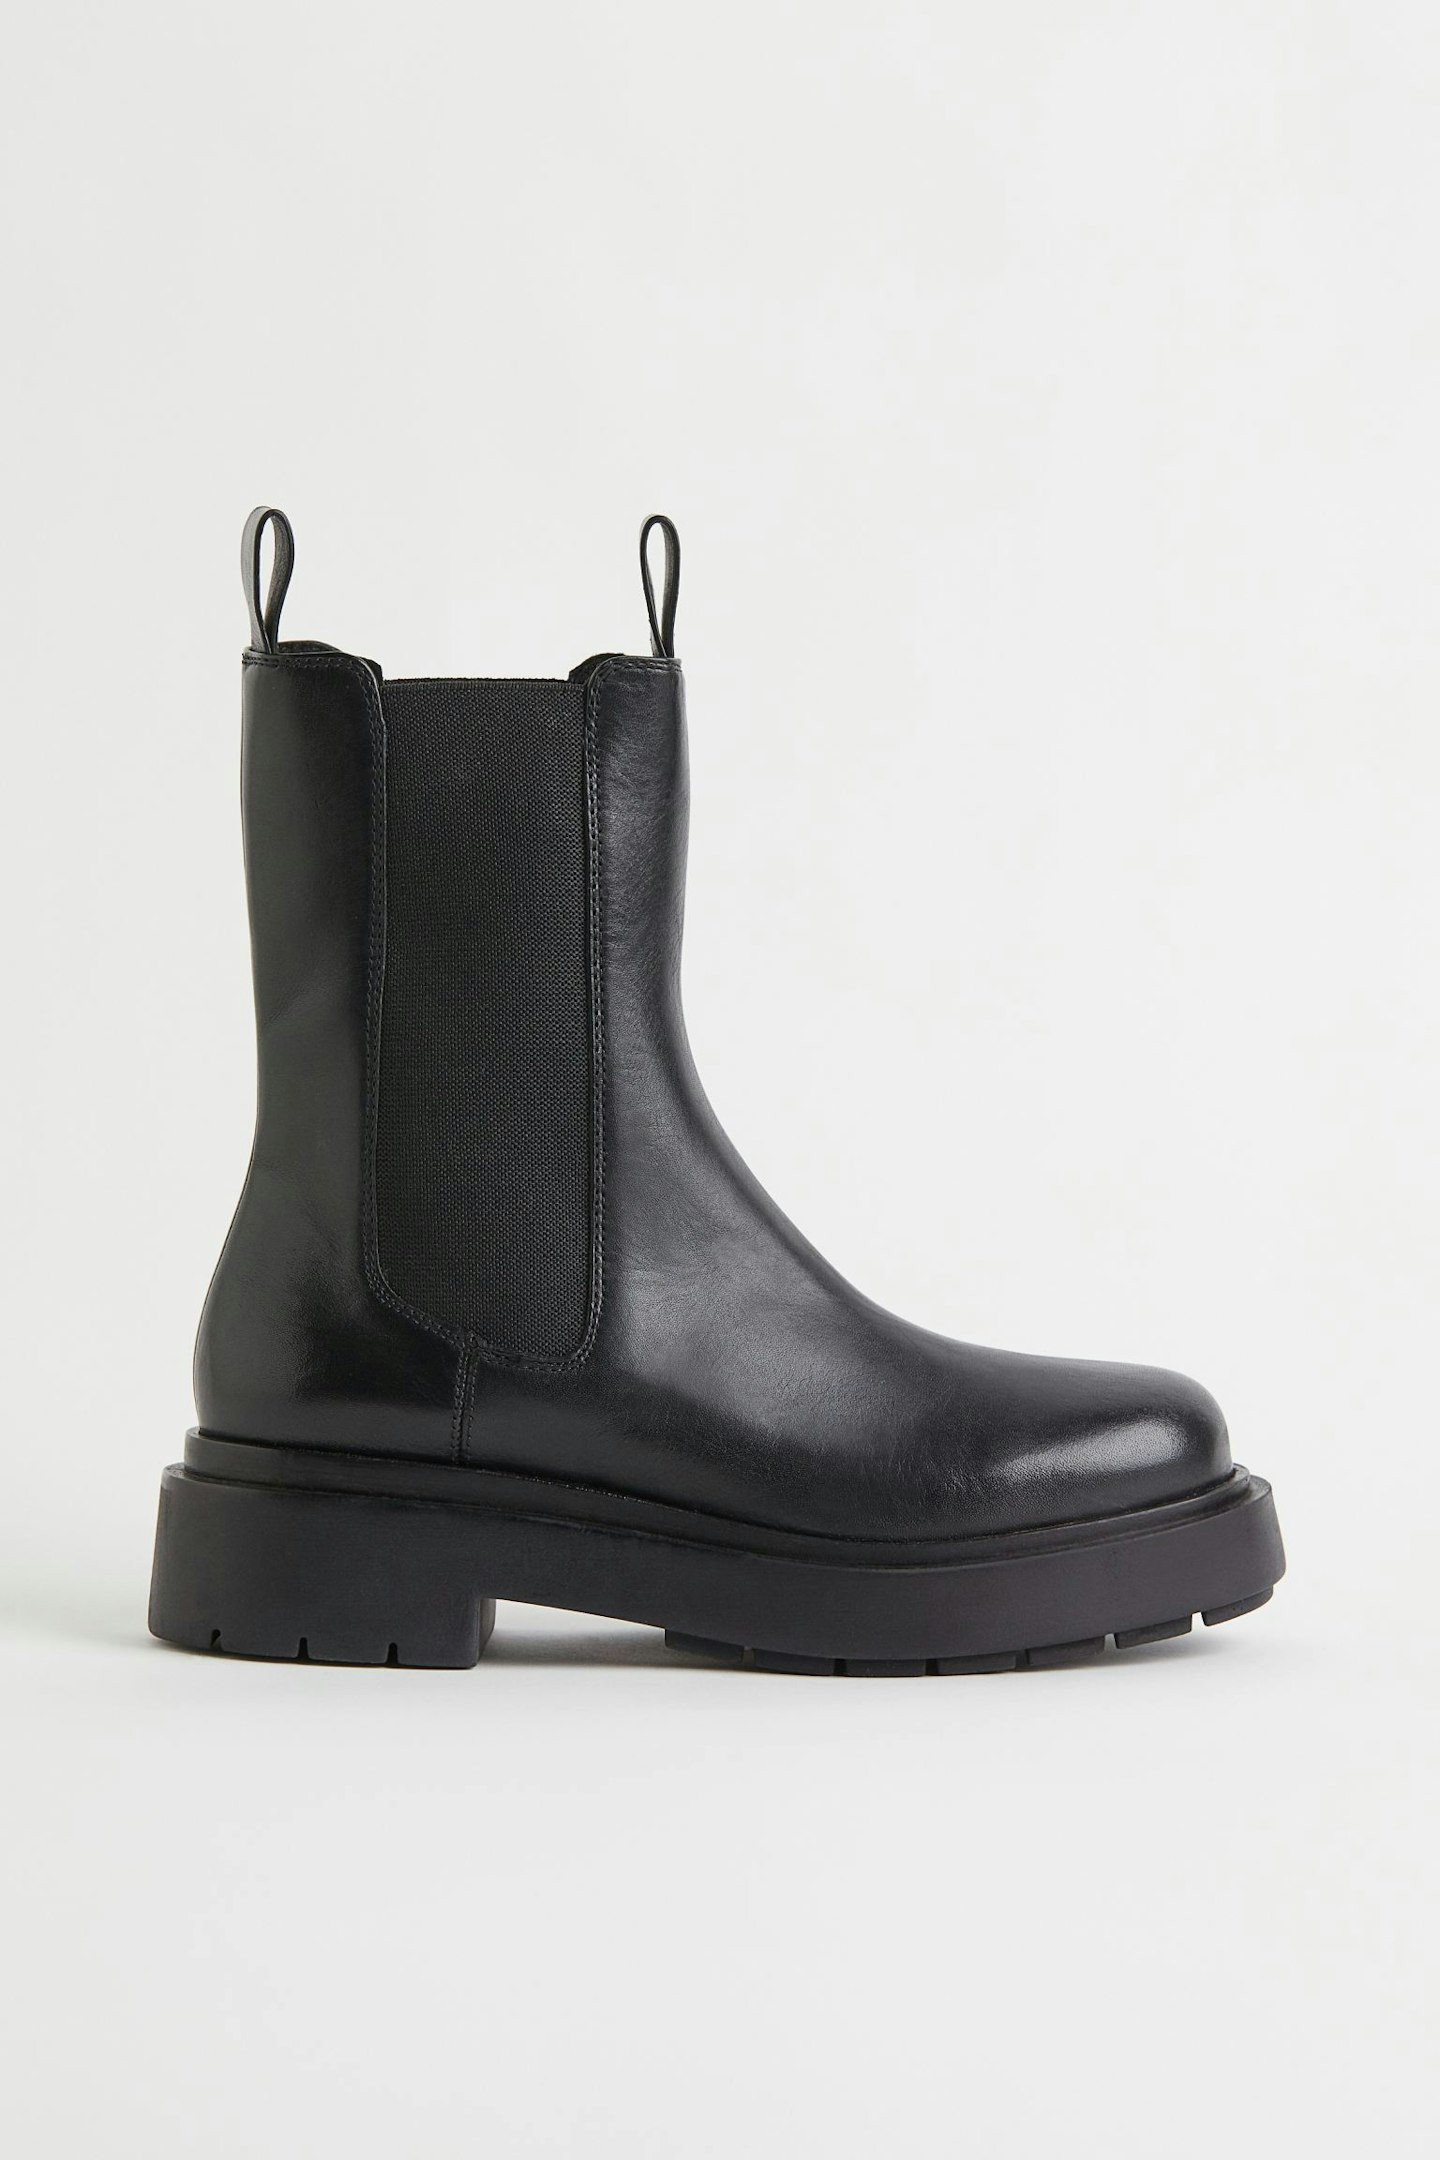 These H&M Boots Are Similar To The Cult Designer Pair